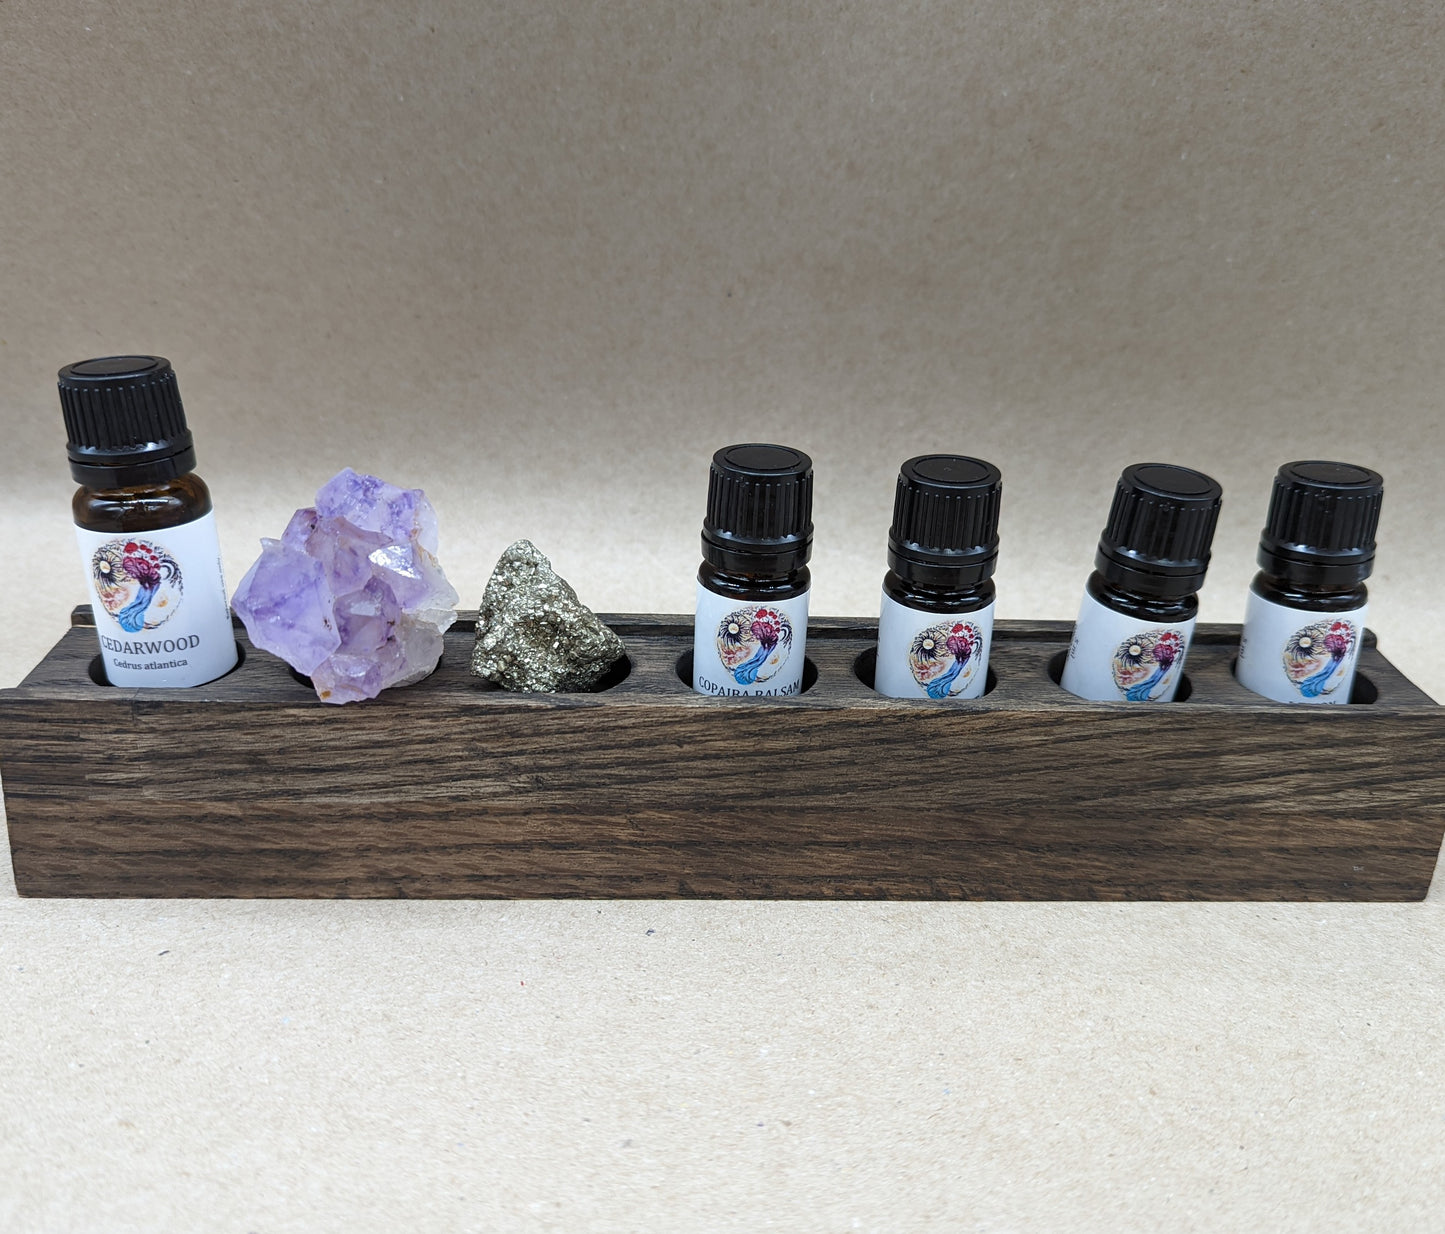 Oil and Crystal Bundle with Hand Crafted Wooden Altar Display | Display Decor for Essential Oils and Crystals